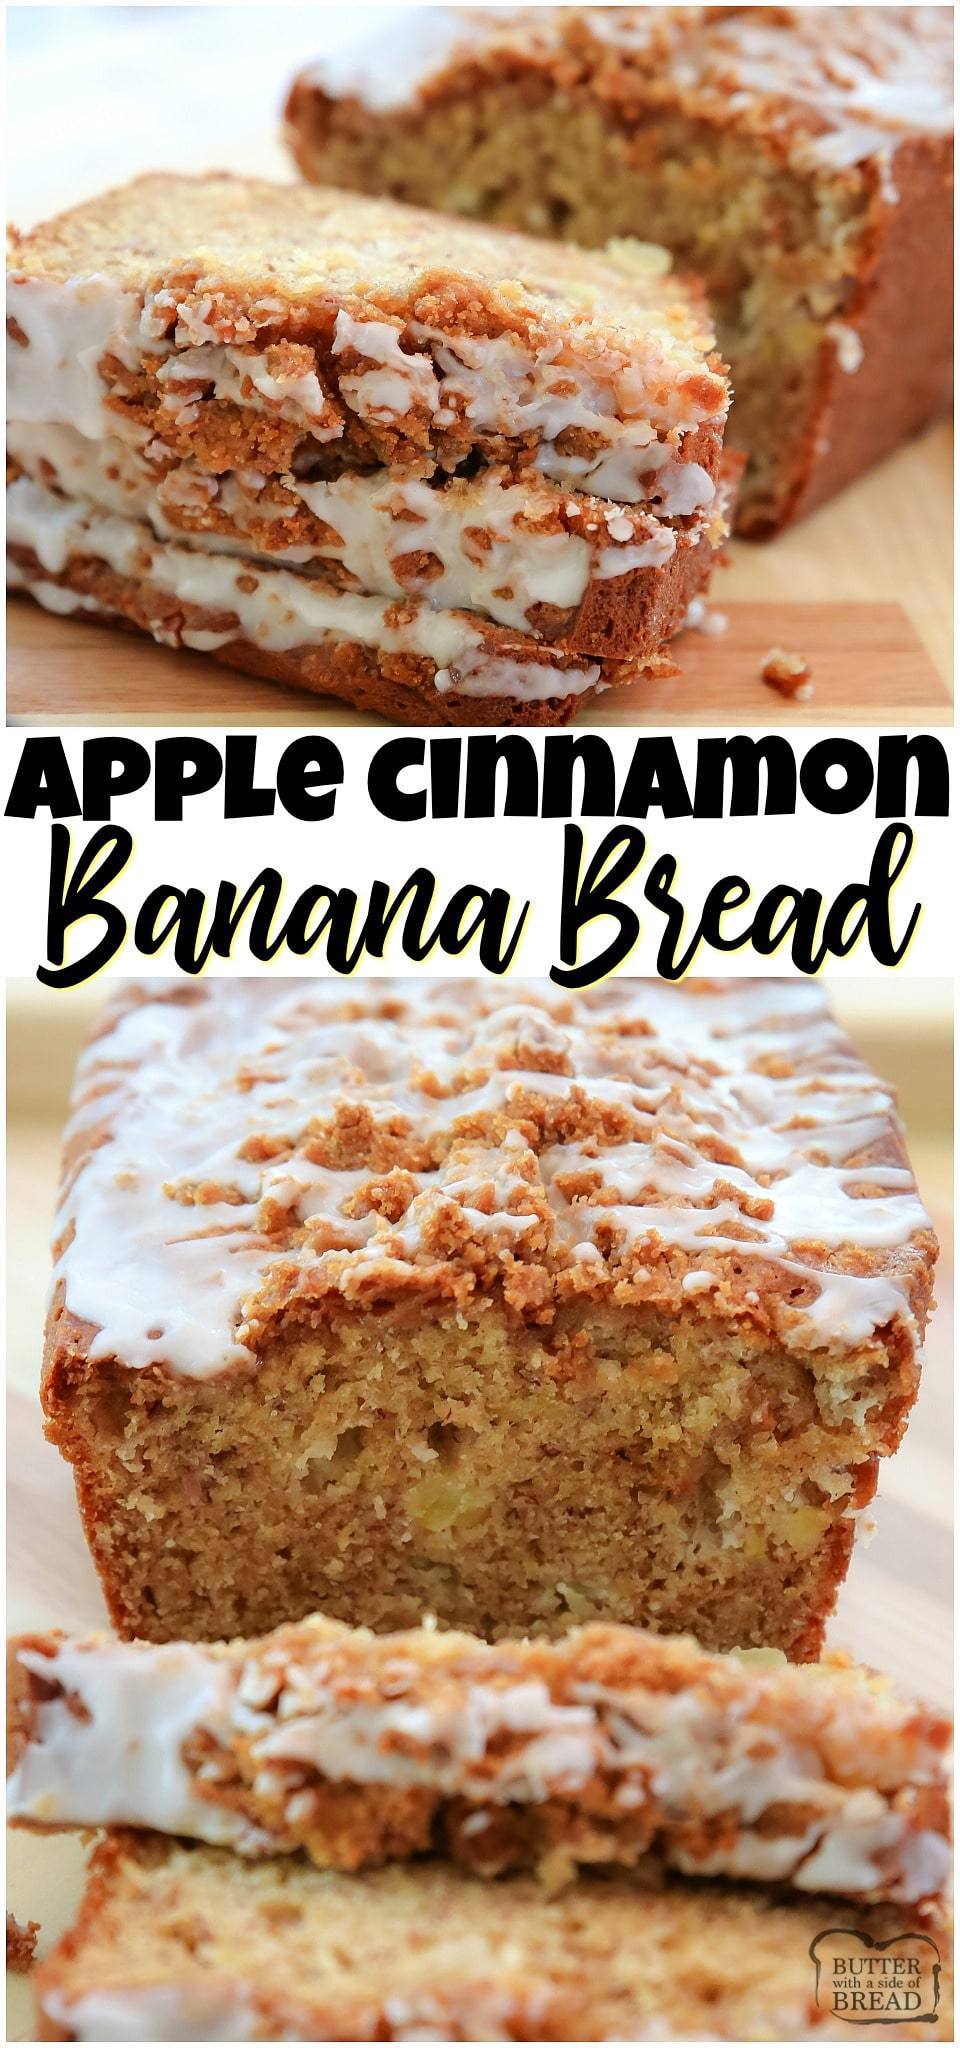 Apple Banana Bread made with ripe bananas and diced sweet apple, topped with a cinnamon streusel and drizzled with icing. Our favorite banana bread recipe ever! #bread #banana #apples #cinnamon #baking #bananabread #applebread #sweetbread #quickbread #recipe from BUTTER WITH A SIDE OF BREAD